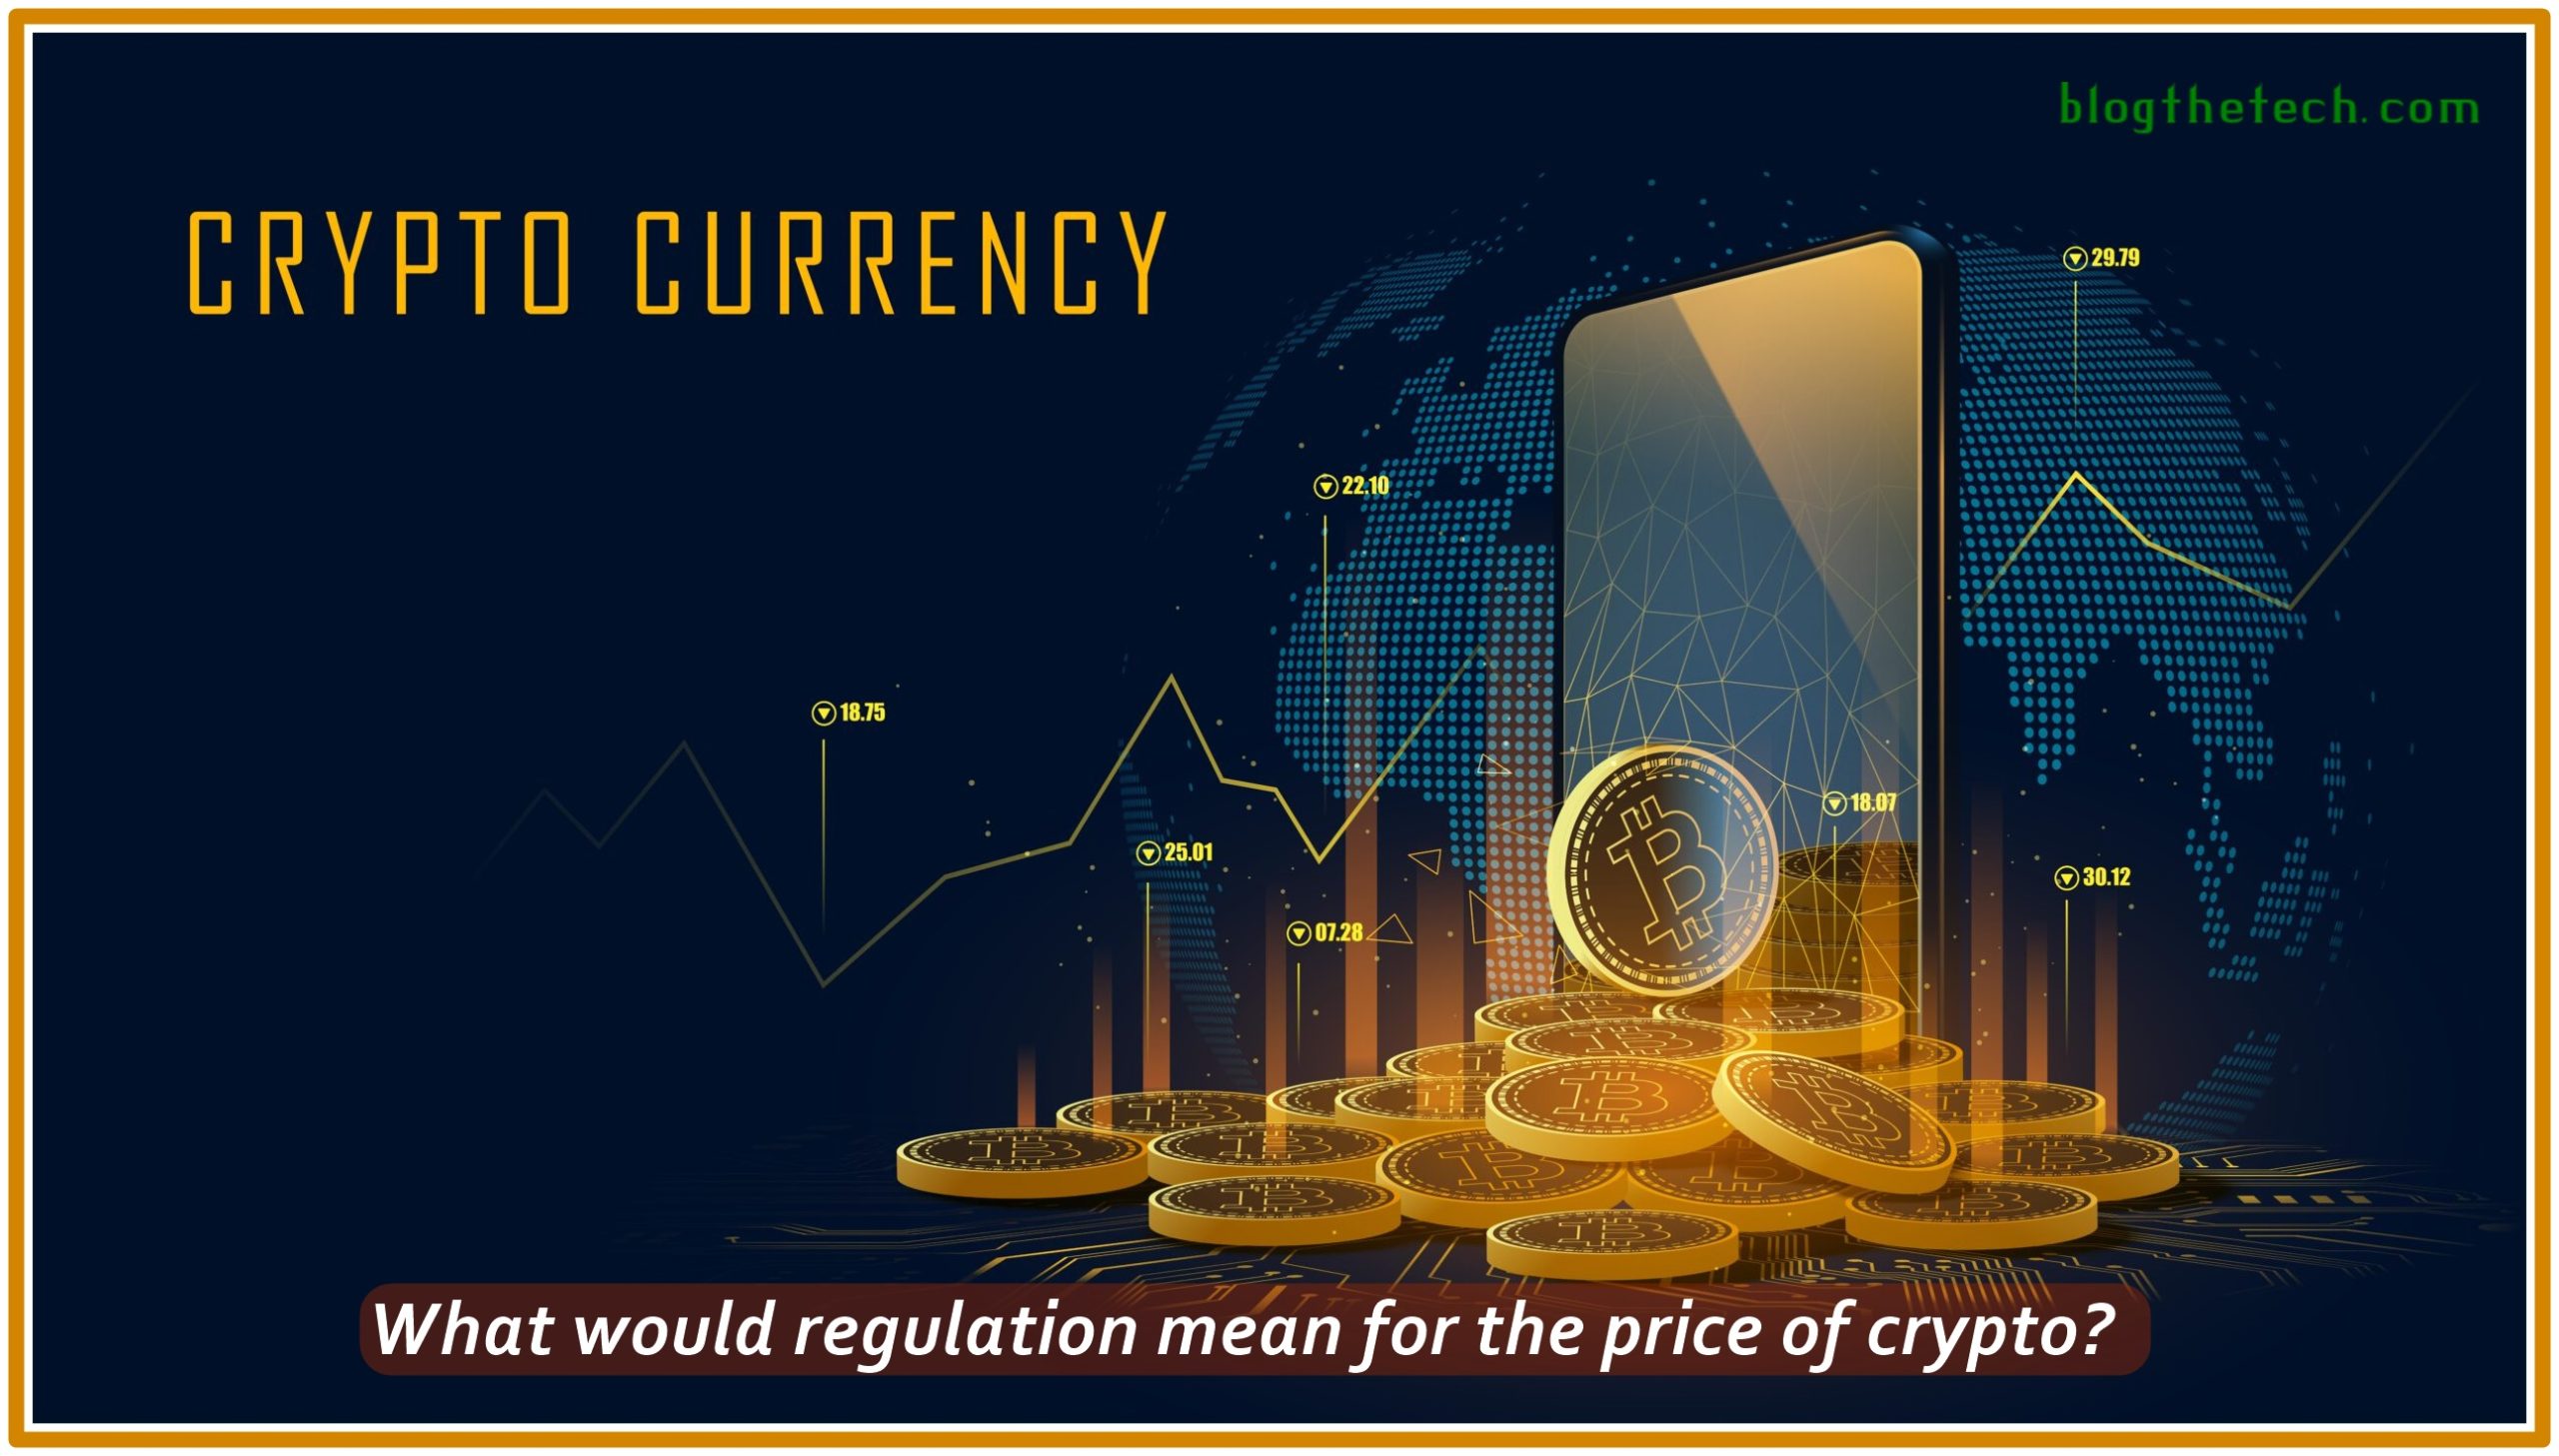 What would regulation mean for the price of crypto?